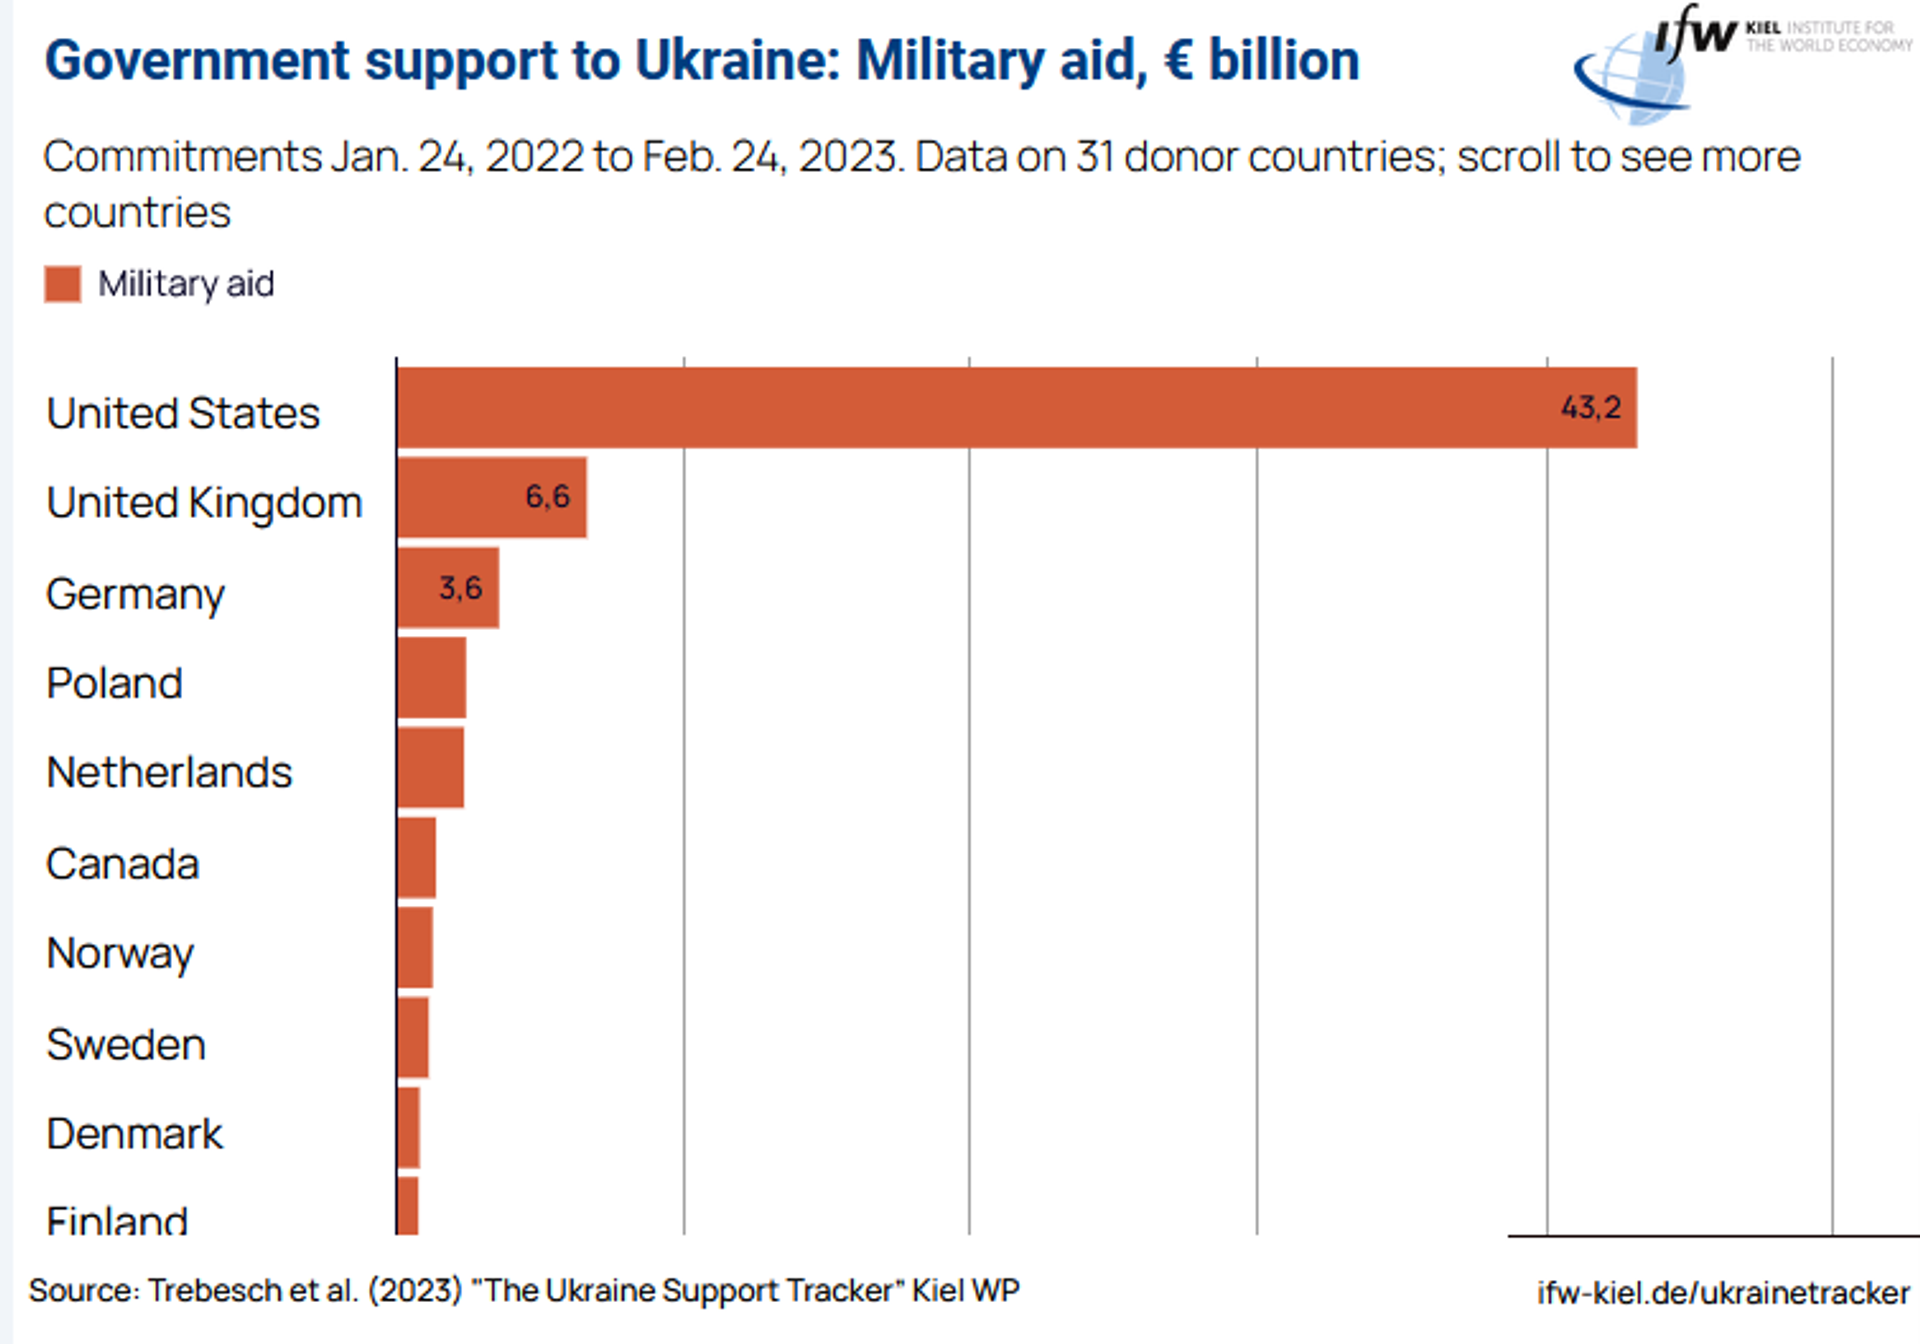 Military aid to Ukraine by country (excluding EU institutions) by the Kiel Institute for the World Economy. - Sputnik International, 1920, 26.04.2023